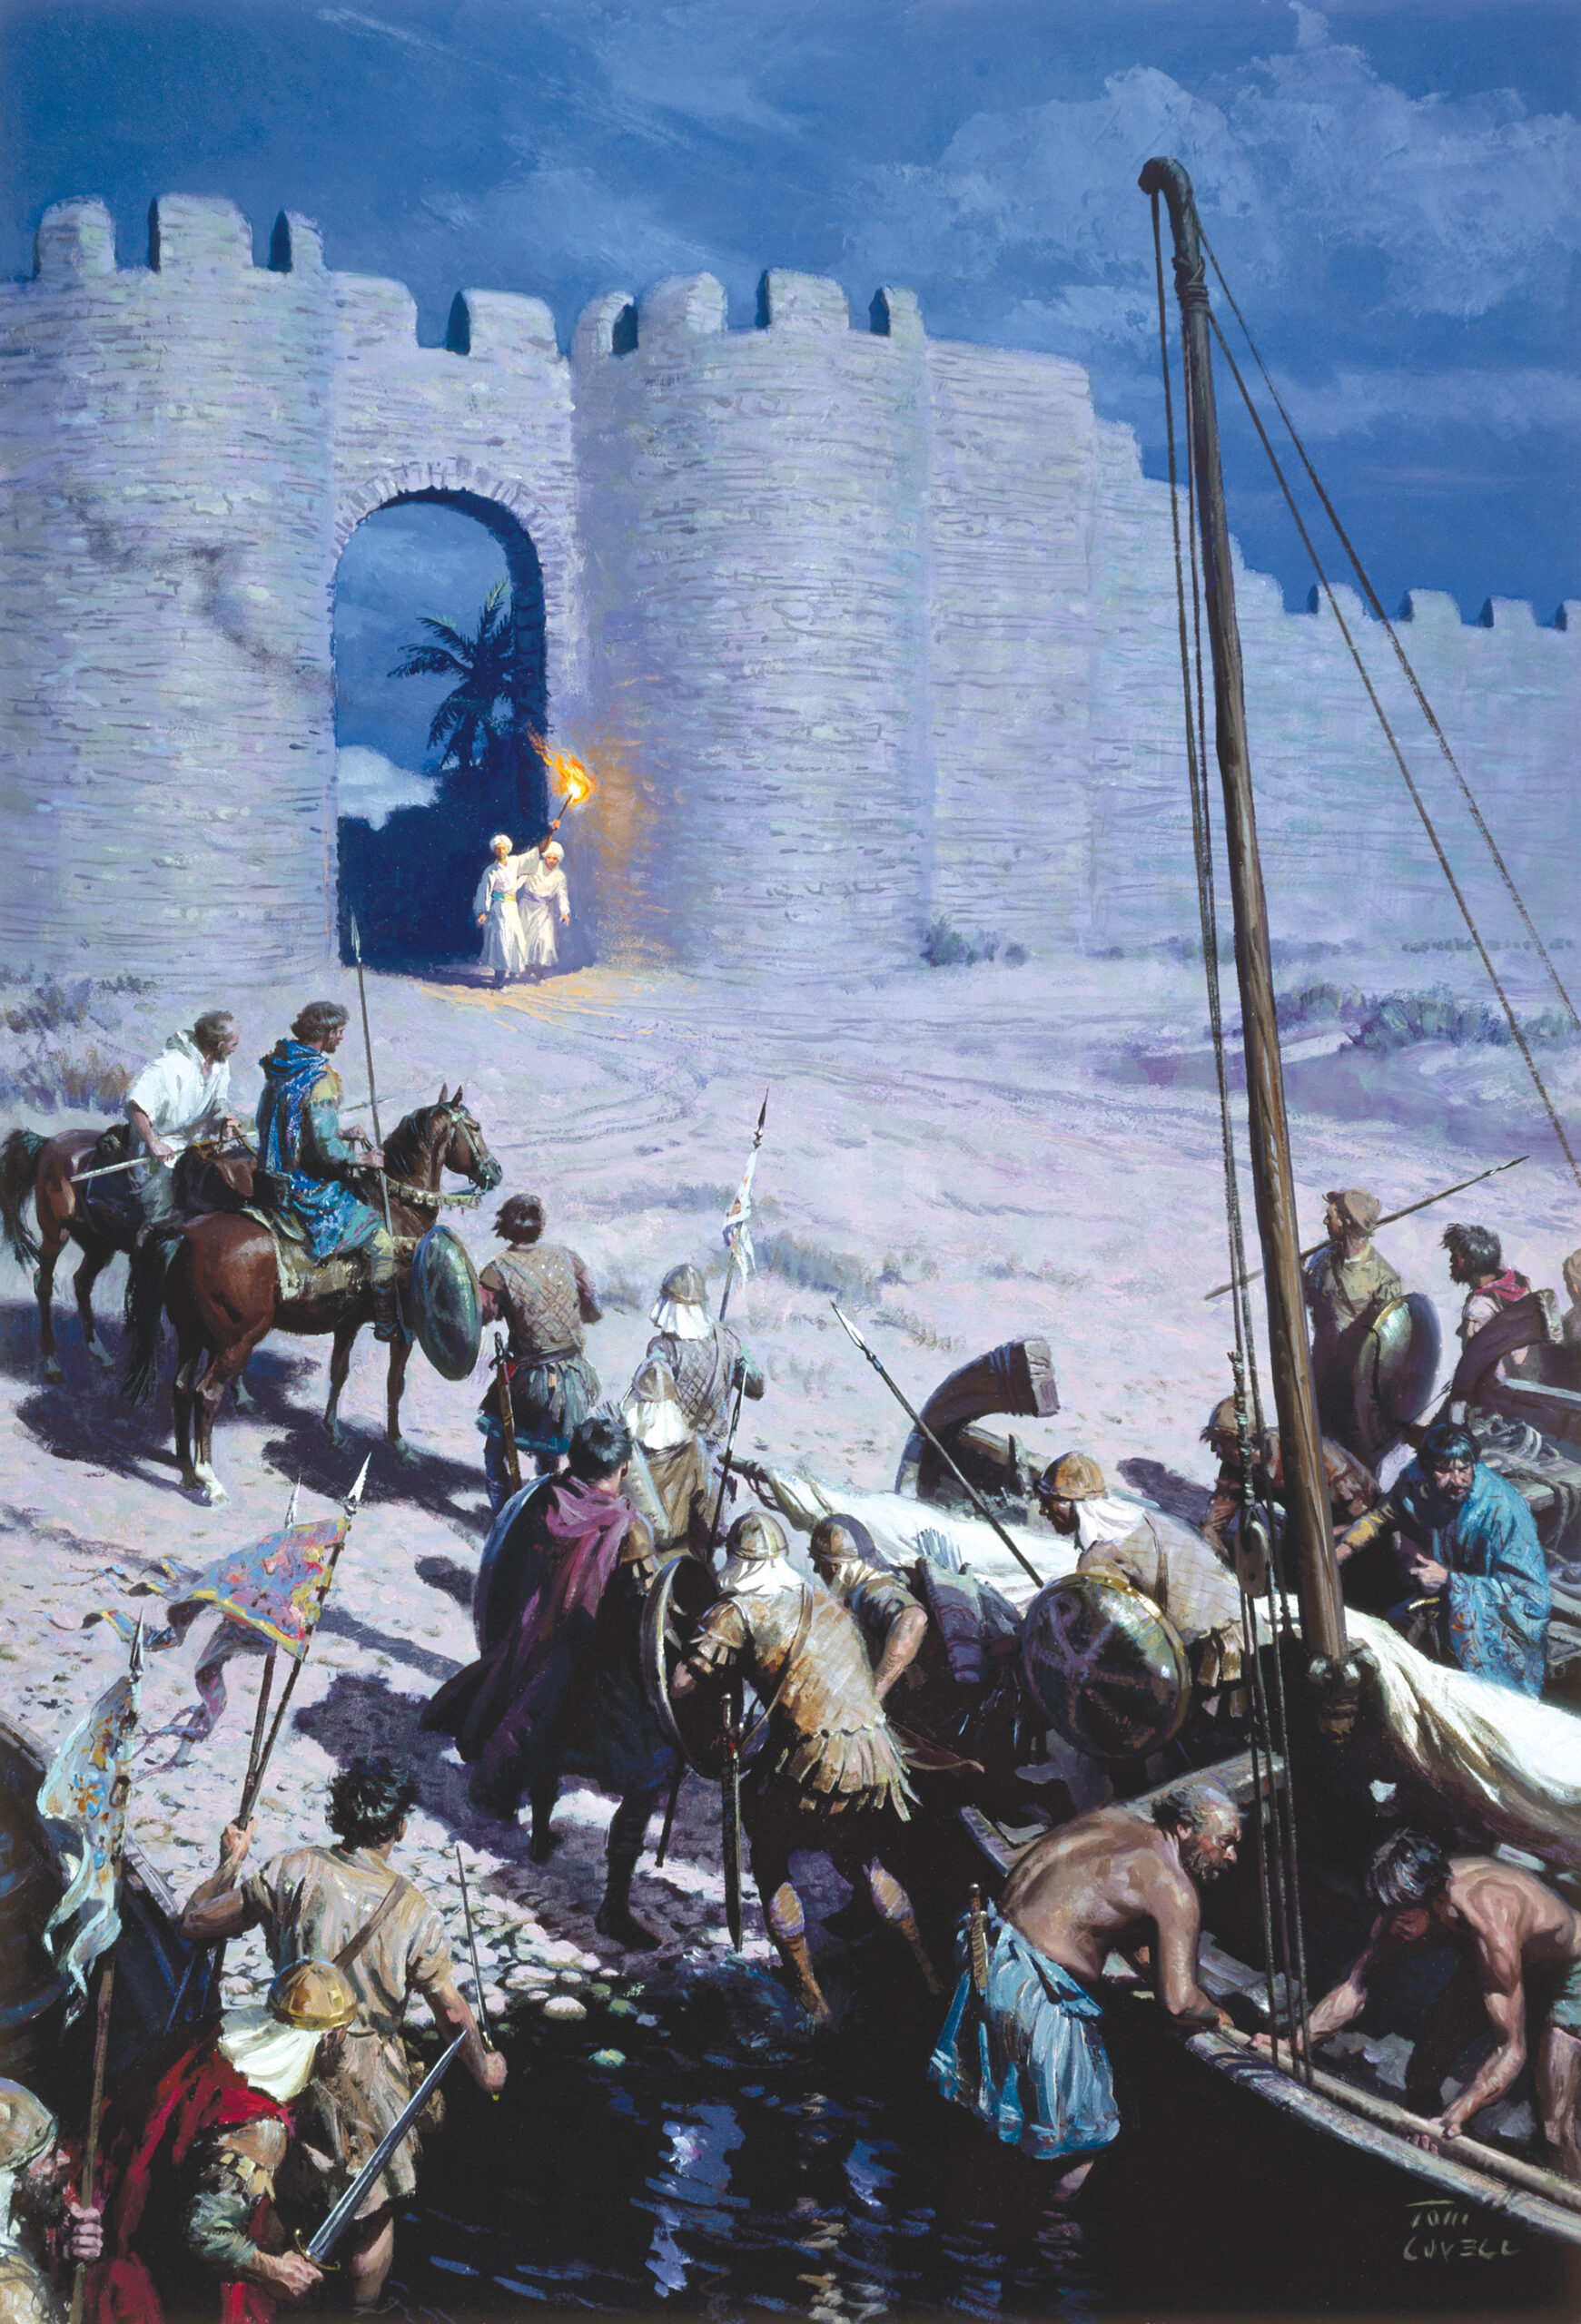 Byzantines troops are shown sneaking into Nicea on the night of June 18-19, 1097. The Franks captured the fortress at the outset of the First Crusade from the Seljuks while Sultan Kilij Arslan I was away campaigning.